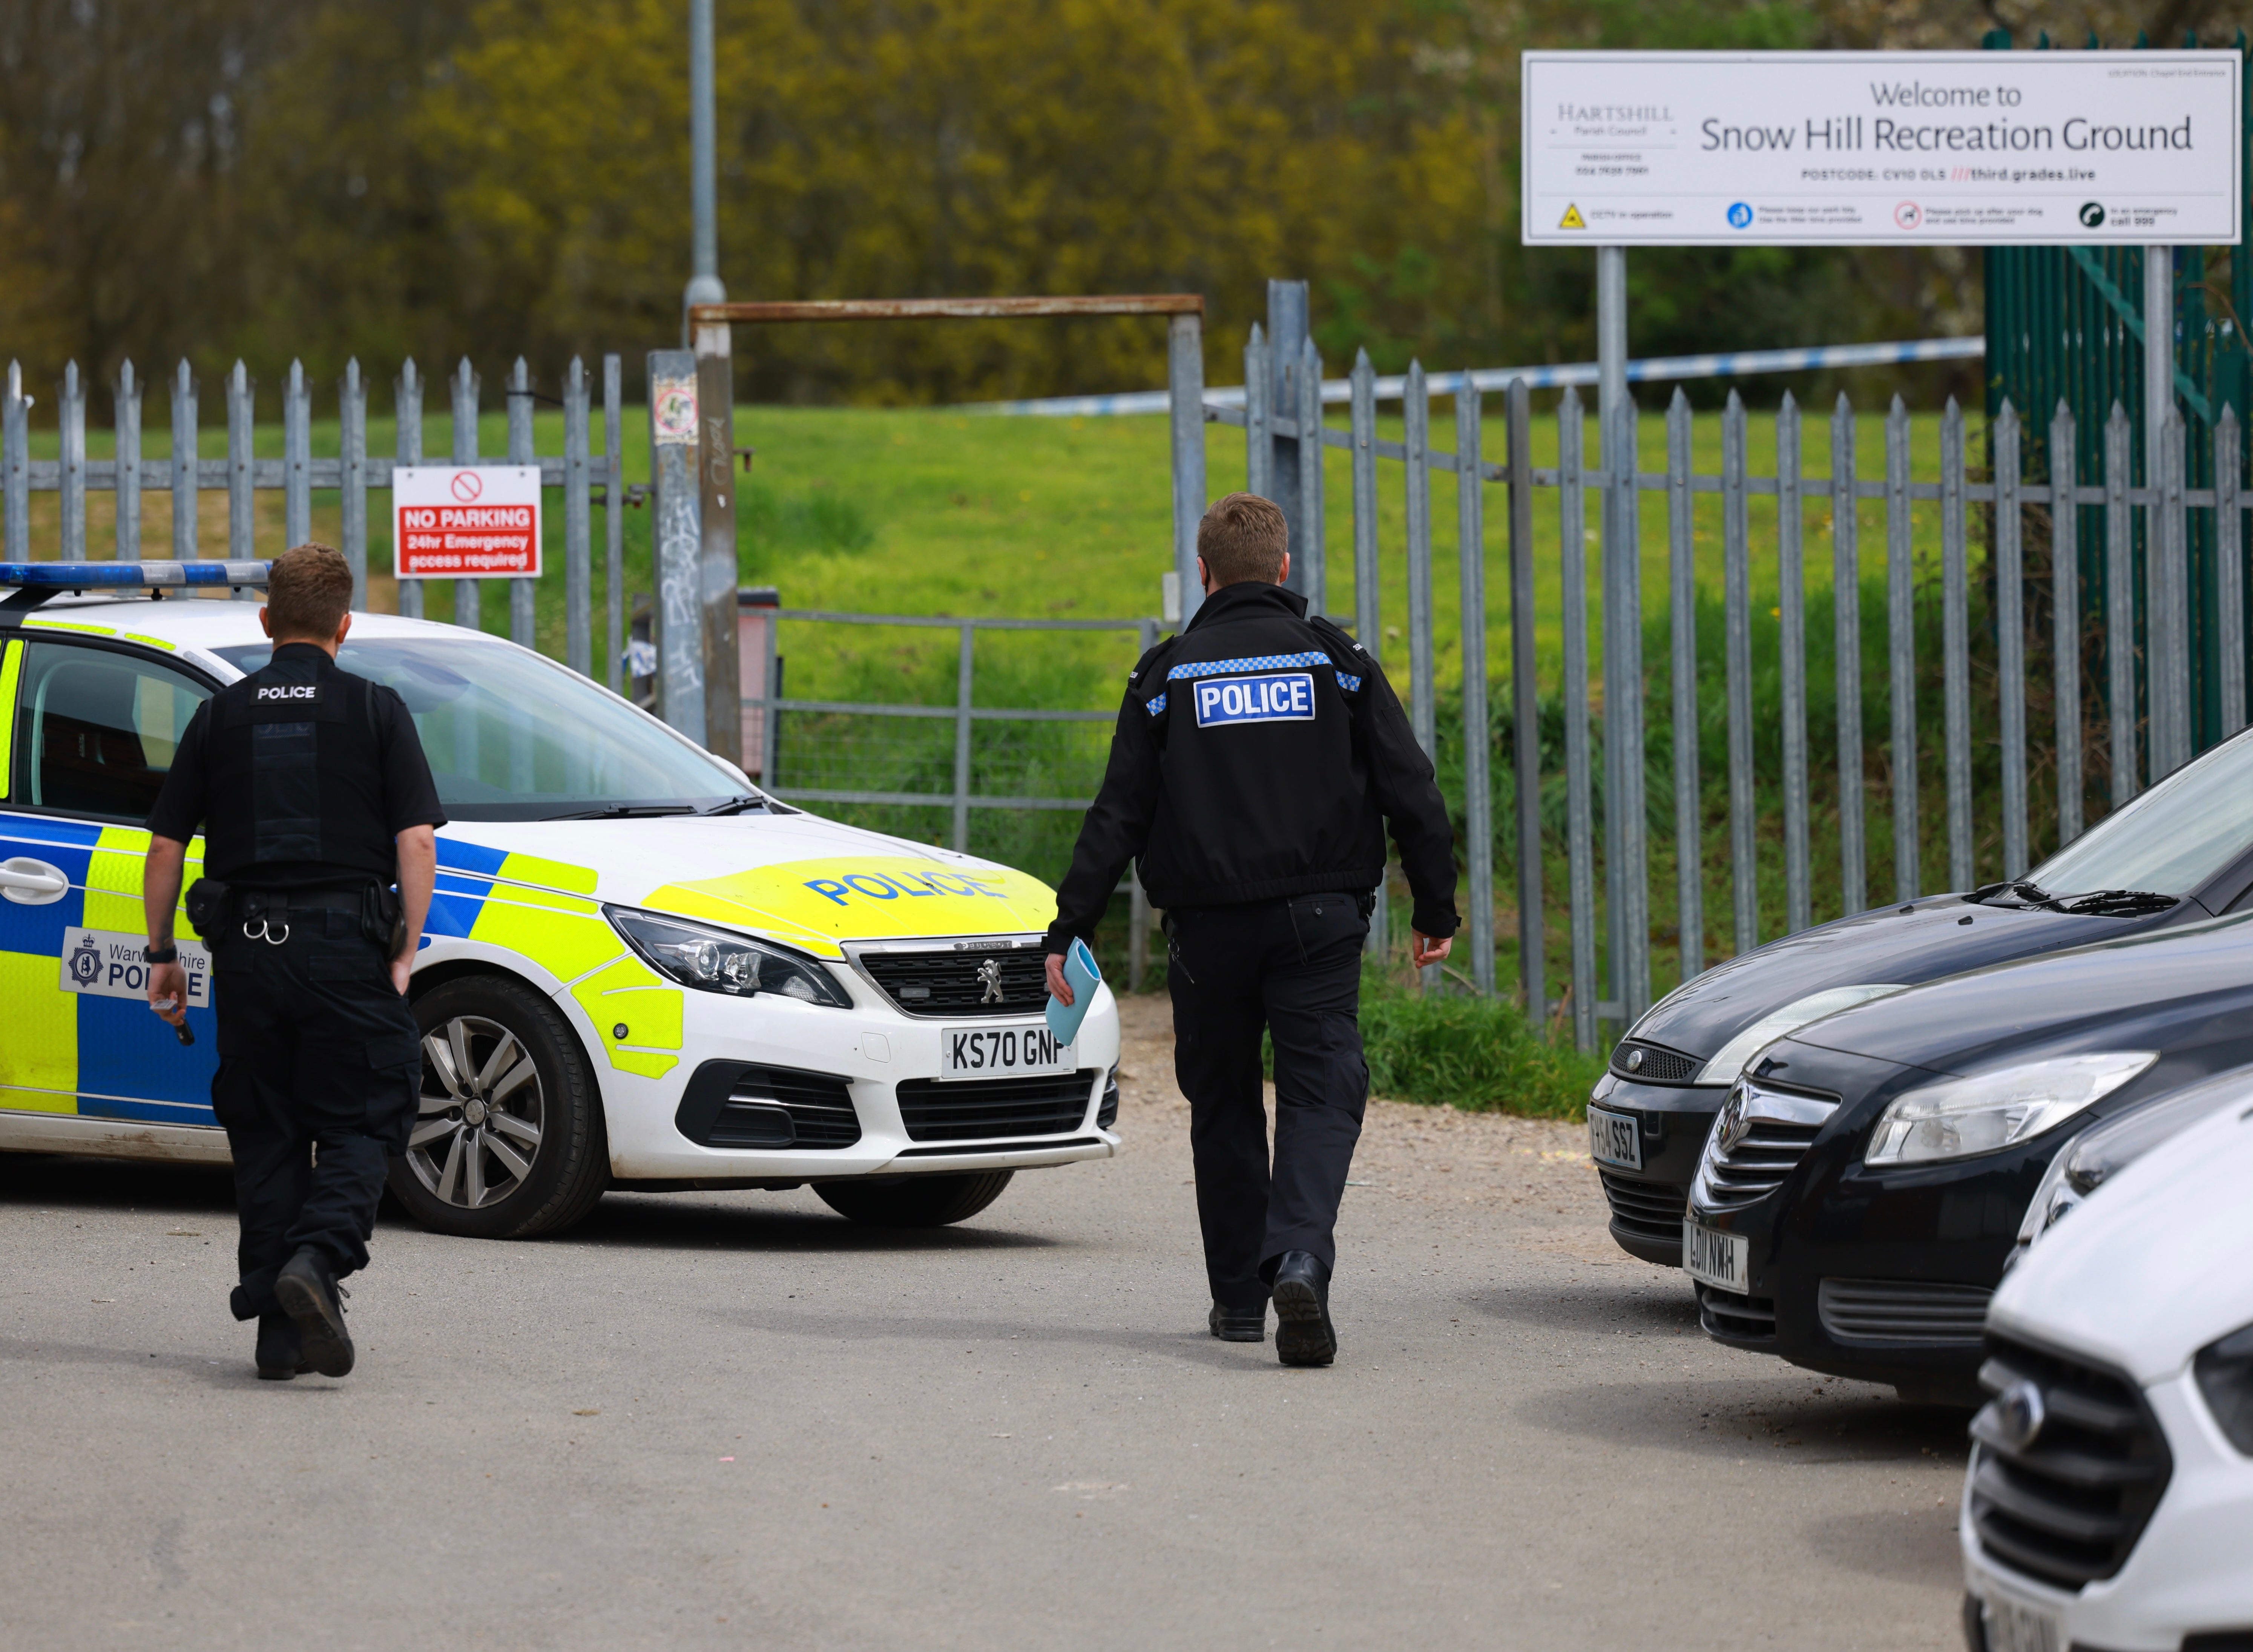 A police car close to the entrance to Snow Hill Recreation Ground, which has been sealed off with police tape.